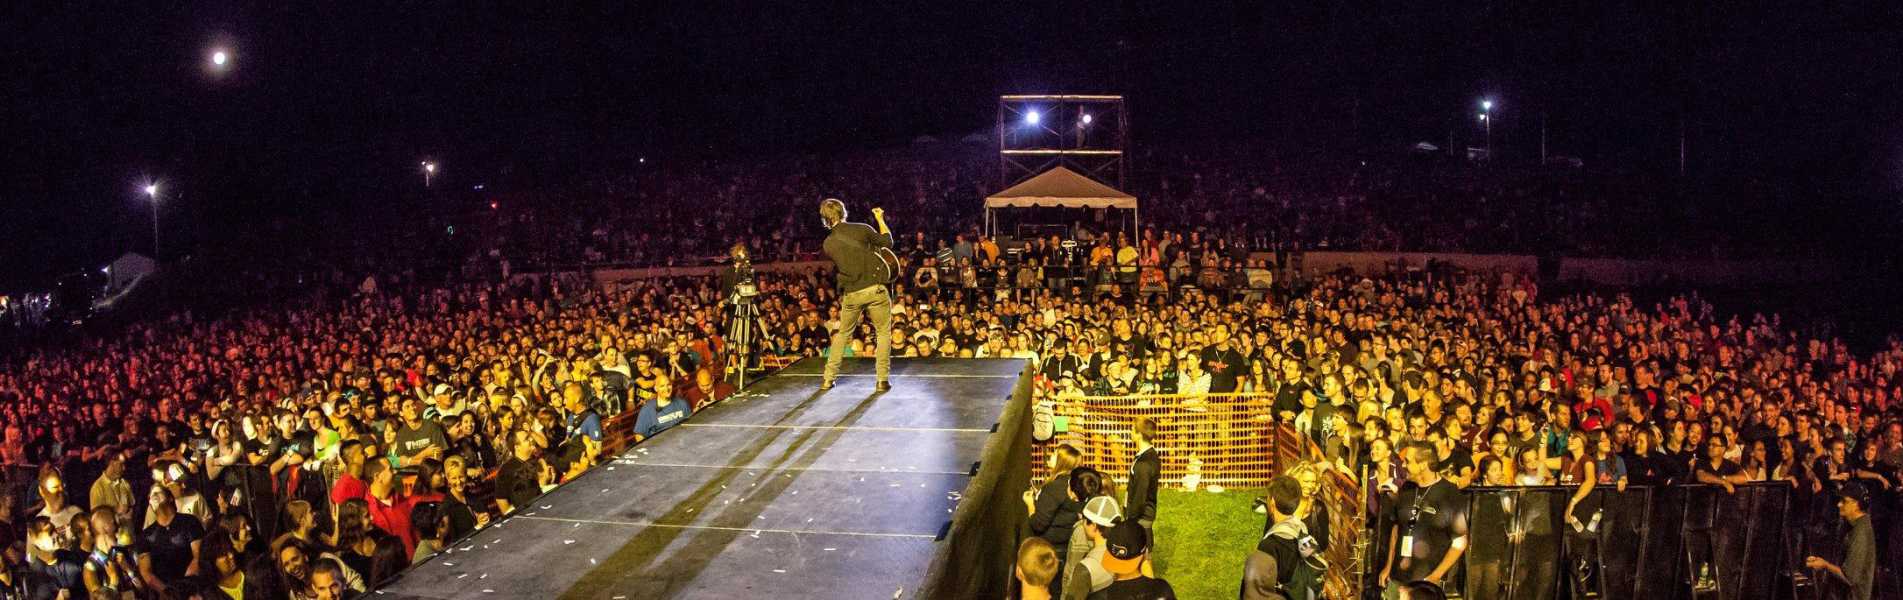 Crowd surrounding the stage at night during the Uprise Festival